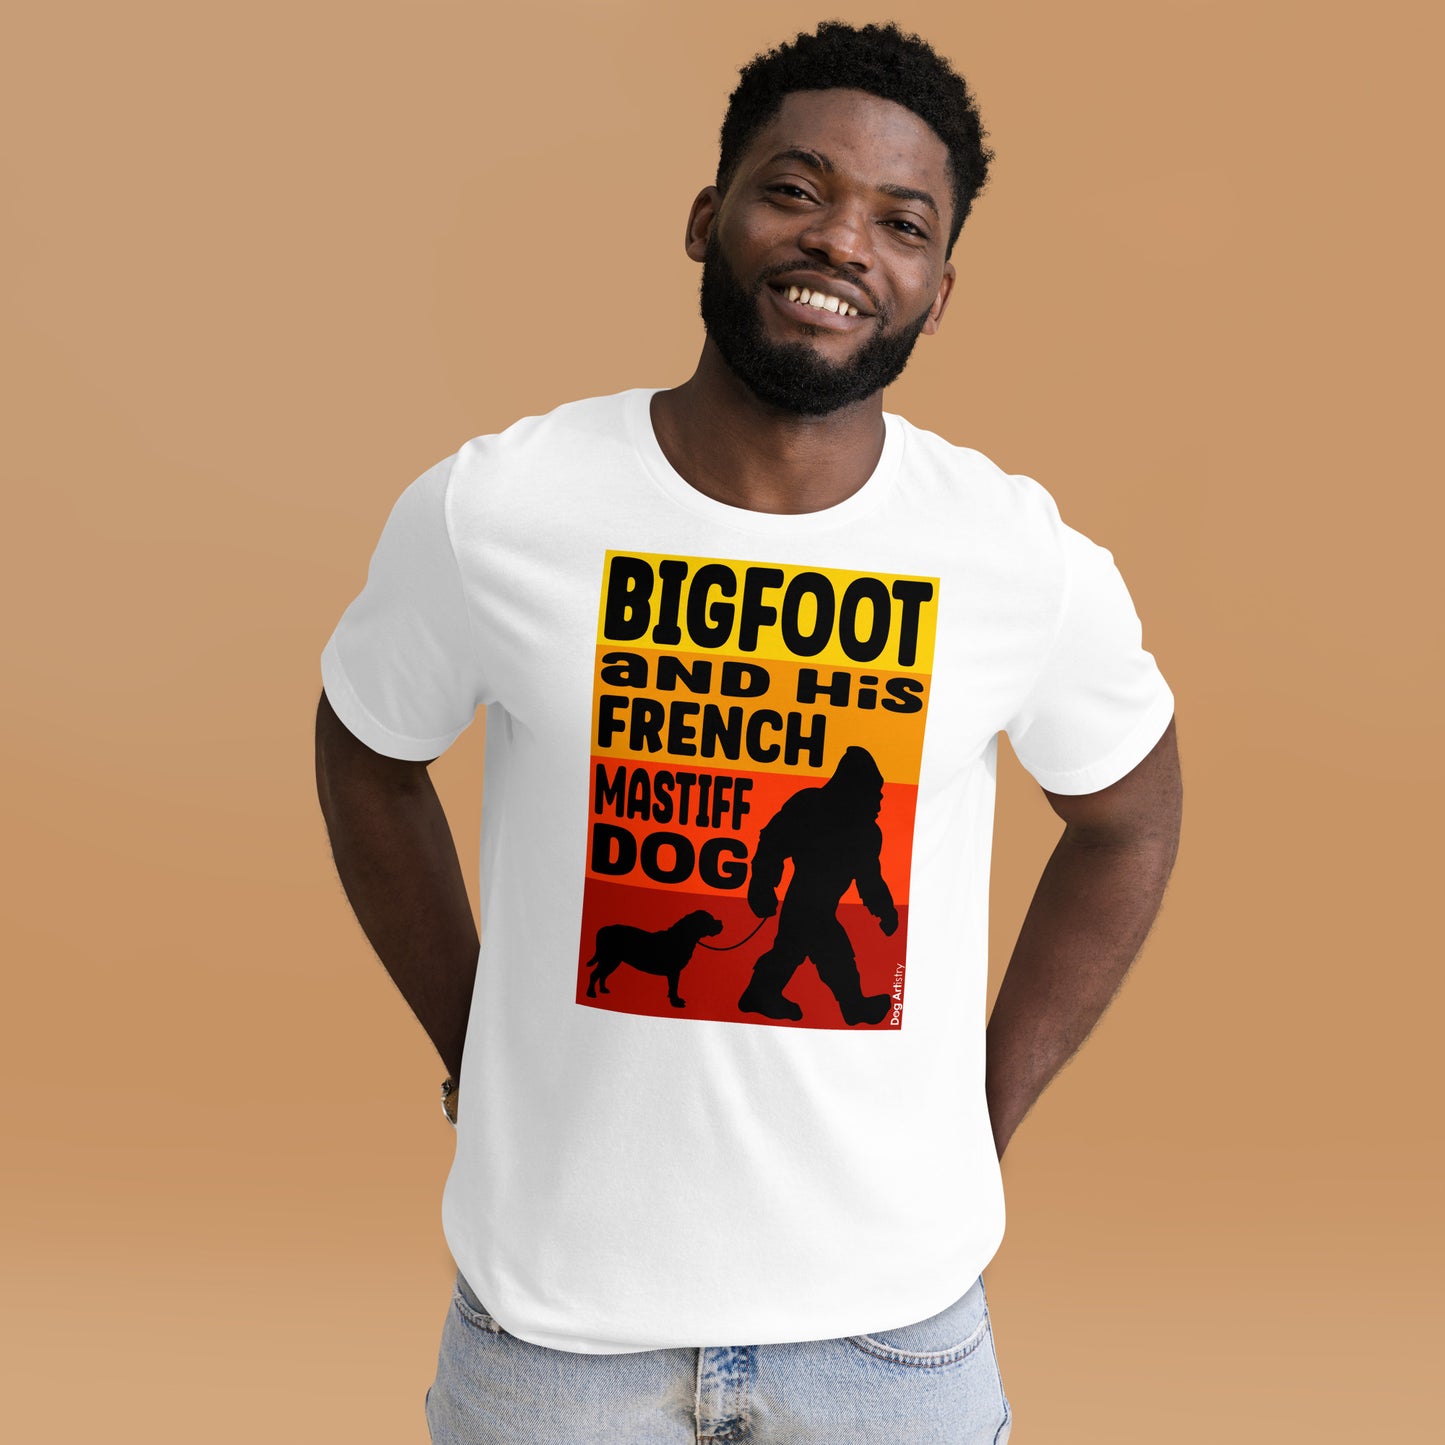 Bigfoot and his French Mastiff unisex white t-shirt by Dog Artistry.